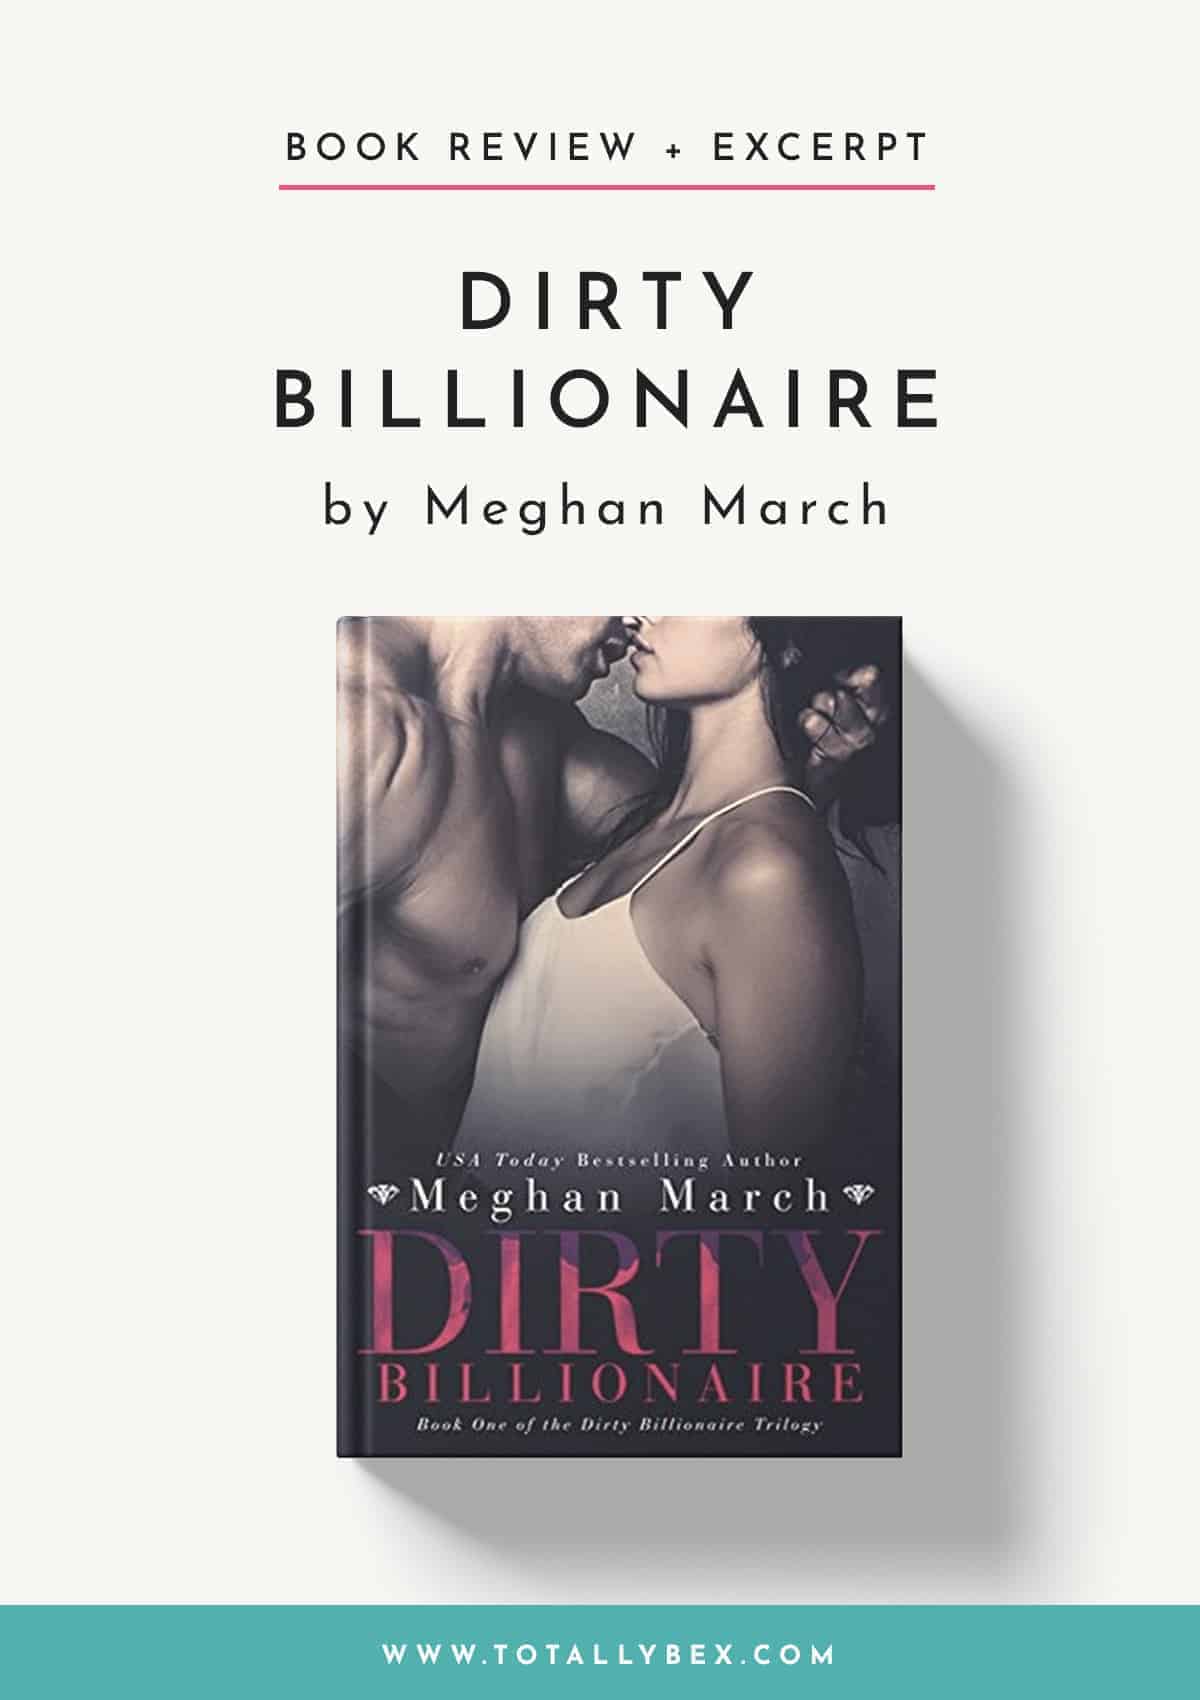 Dirty Billionaire by Meghan March-Book Review+Excerpt